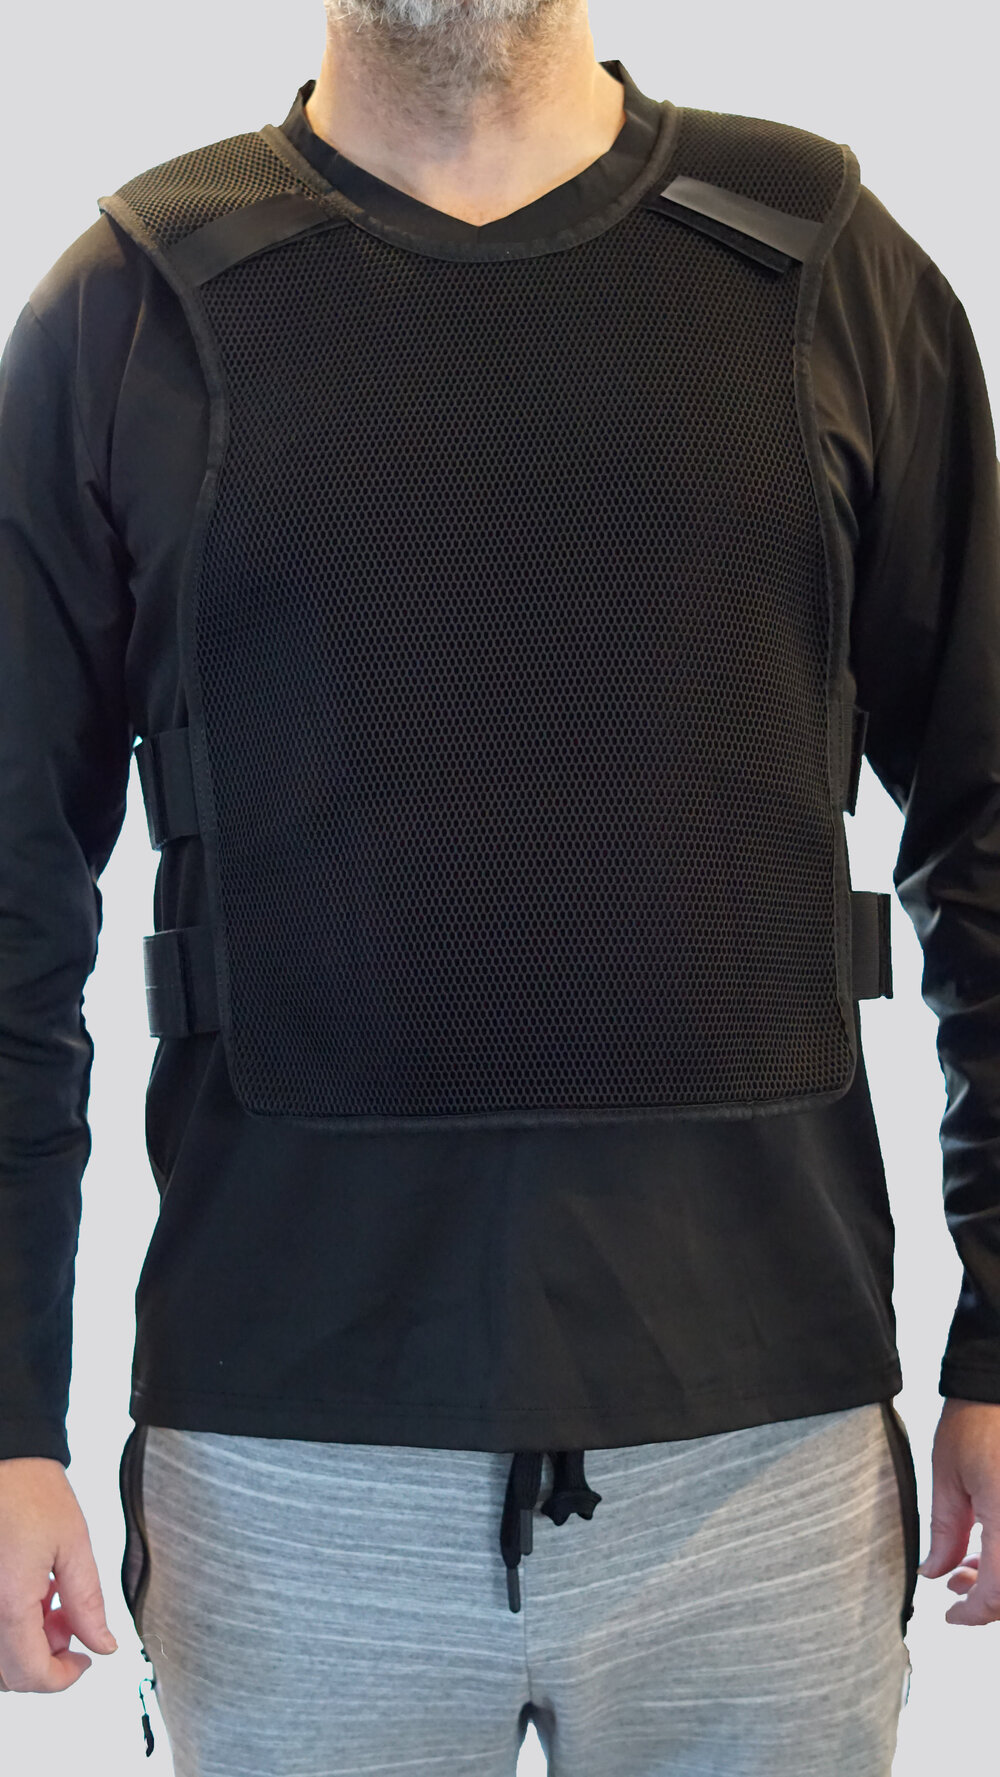 BAC Mesh Cooling  Ventilation Vest for Body Armour Body Armour Canada  Bullet  Cut Resistant Products